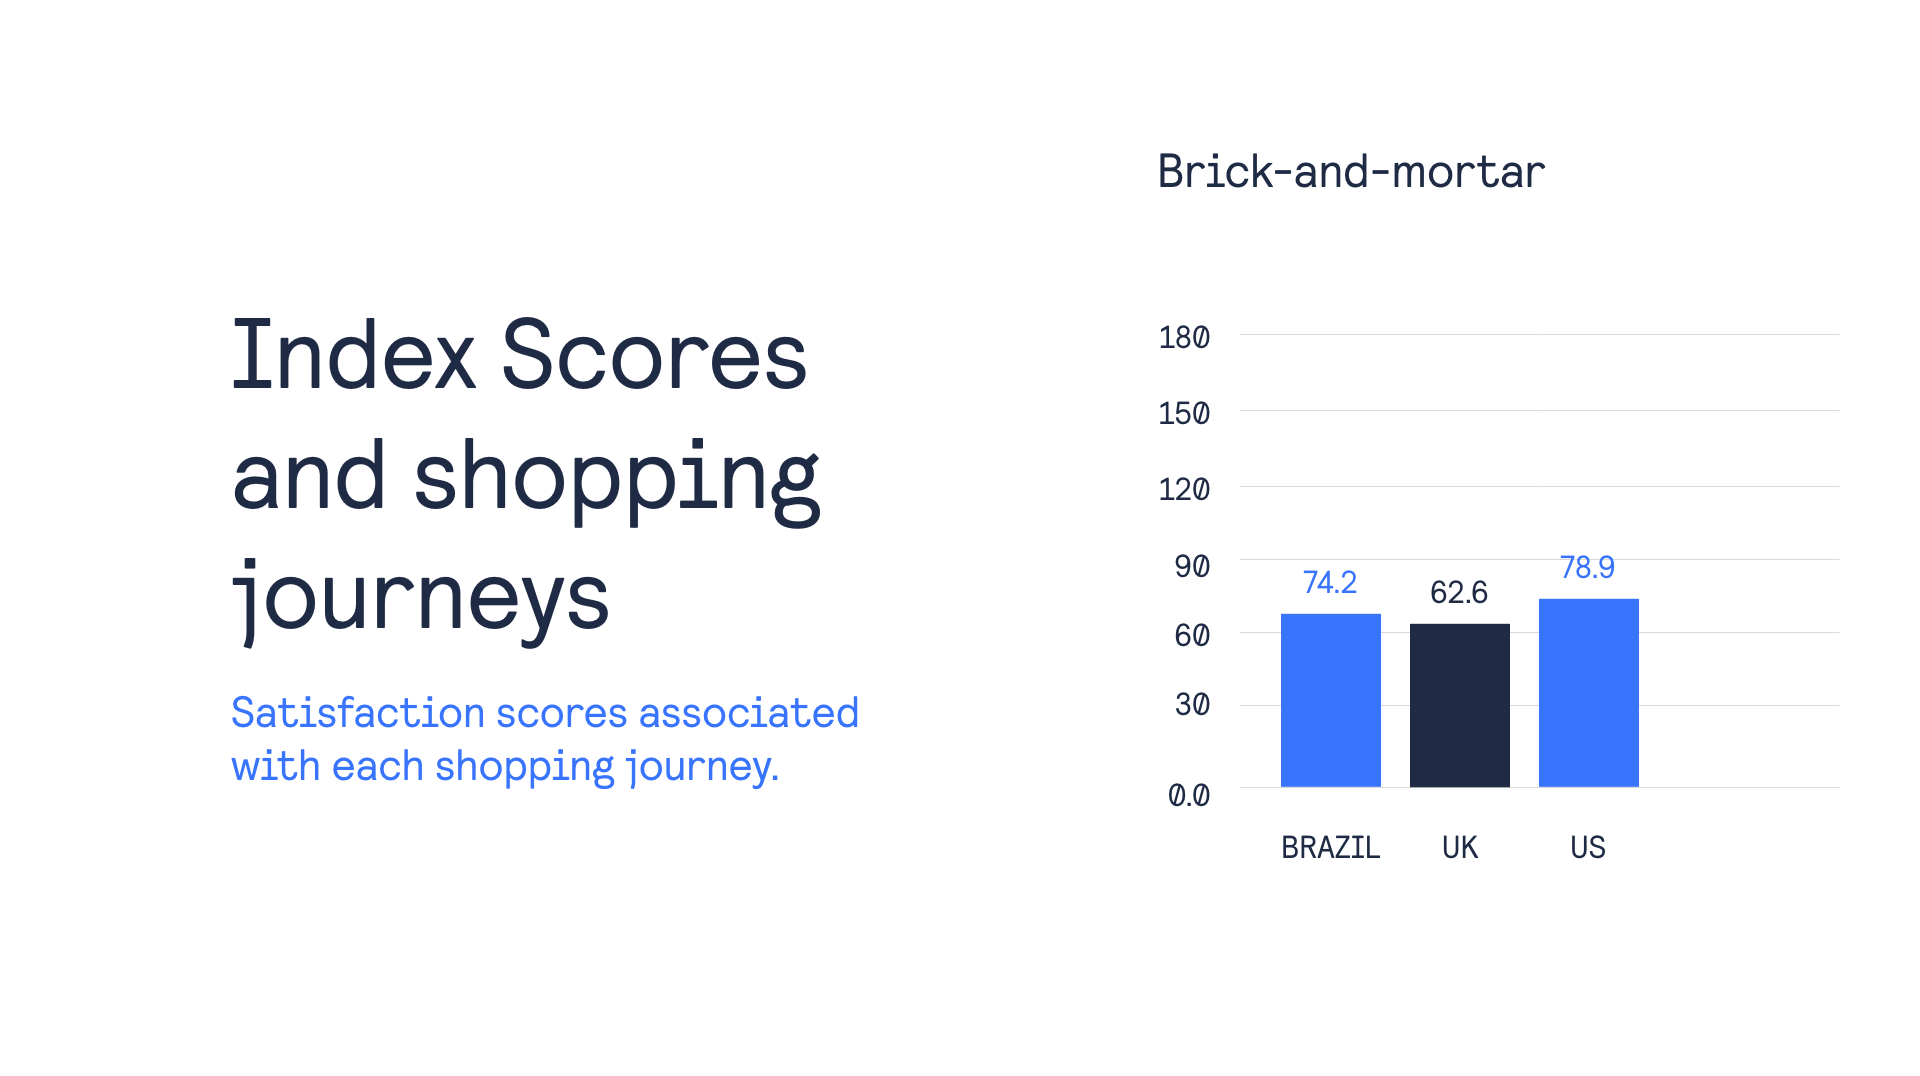 Index scores and shopping journeys chart, brick and mortar.